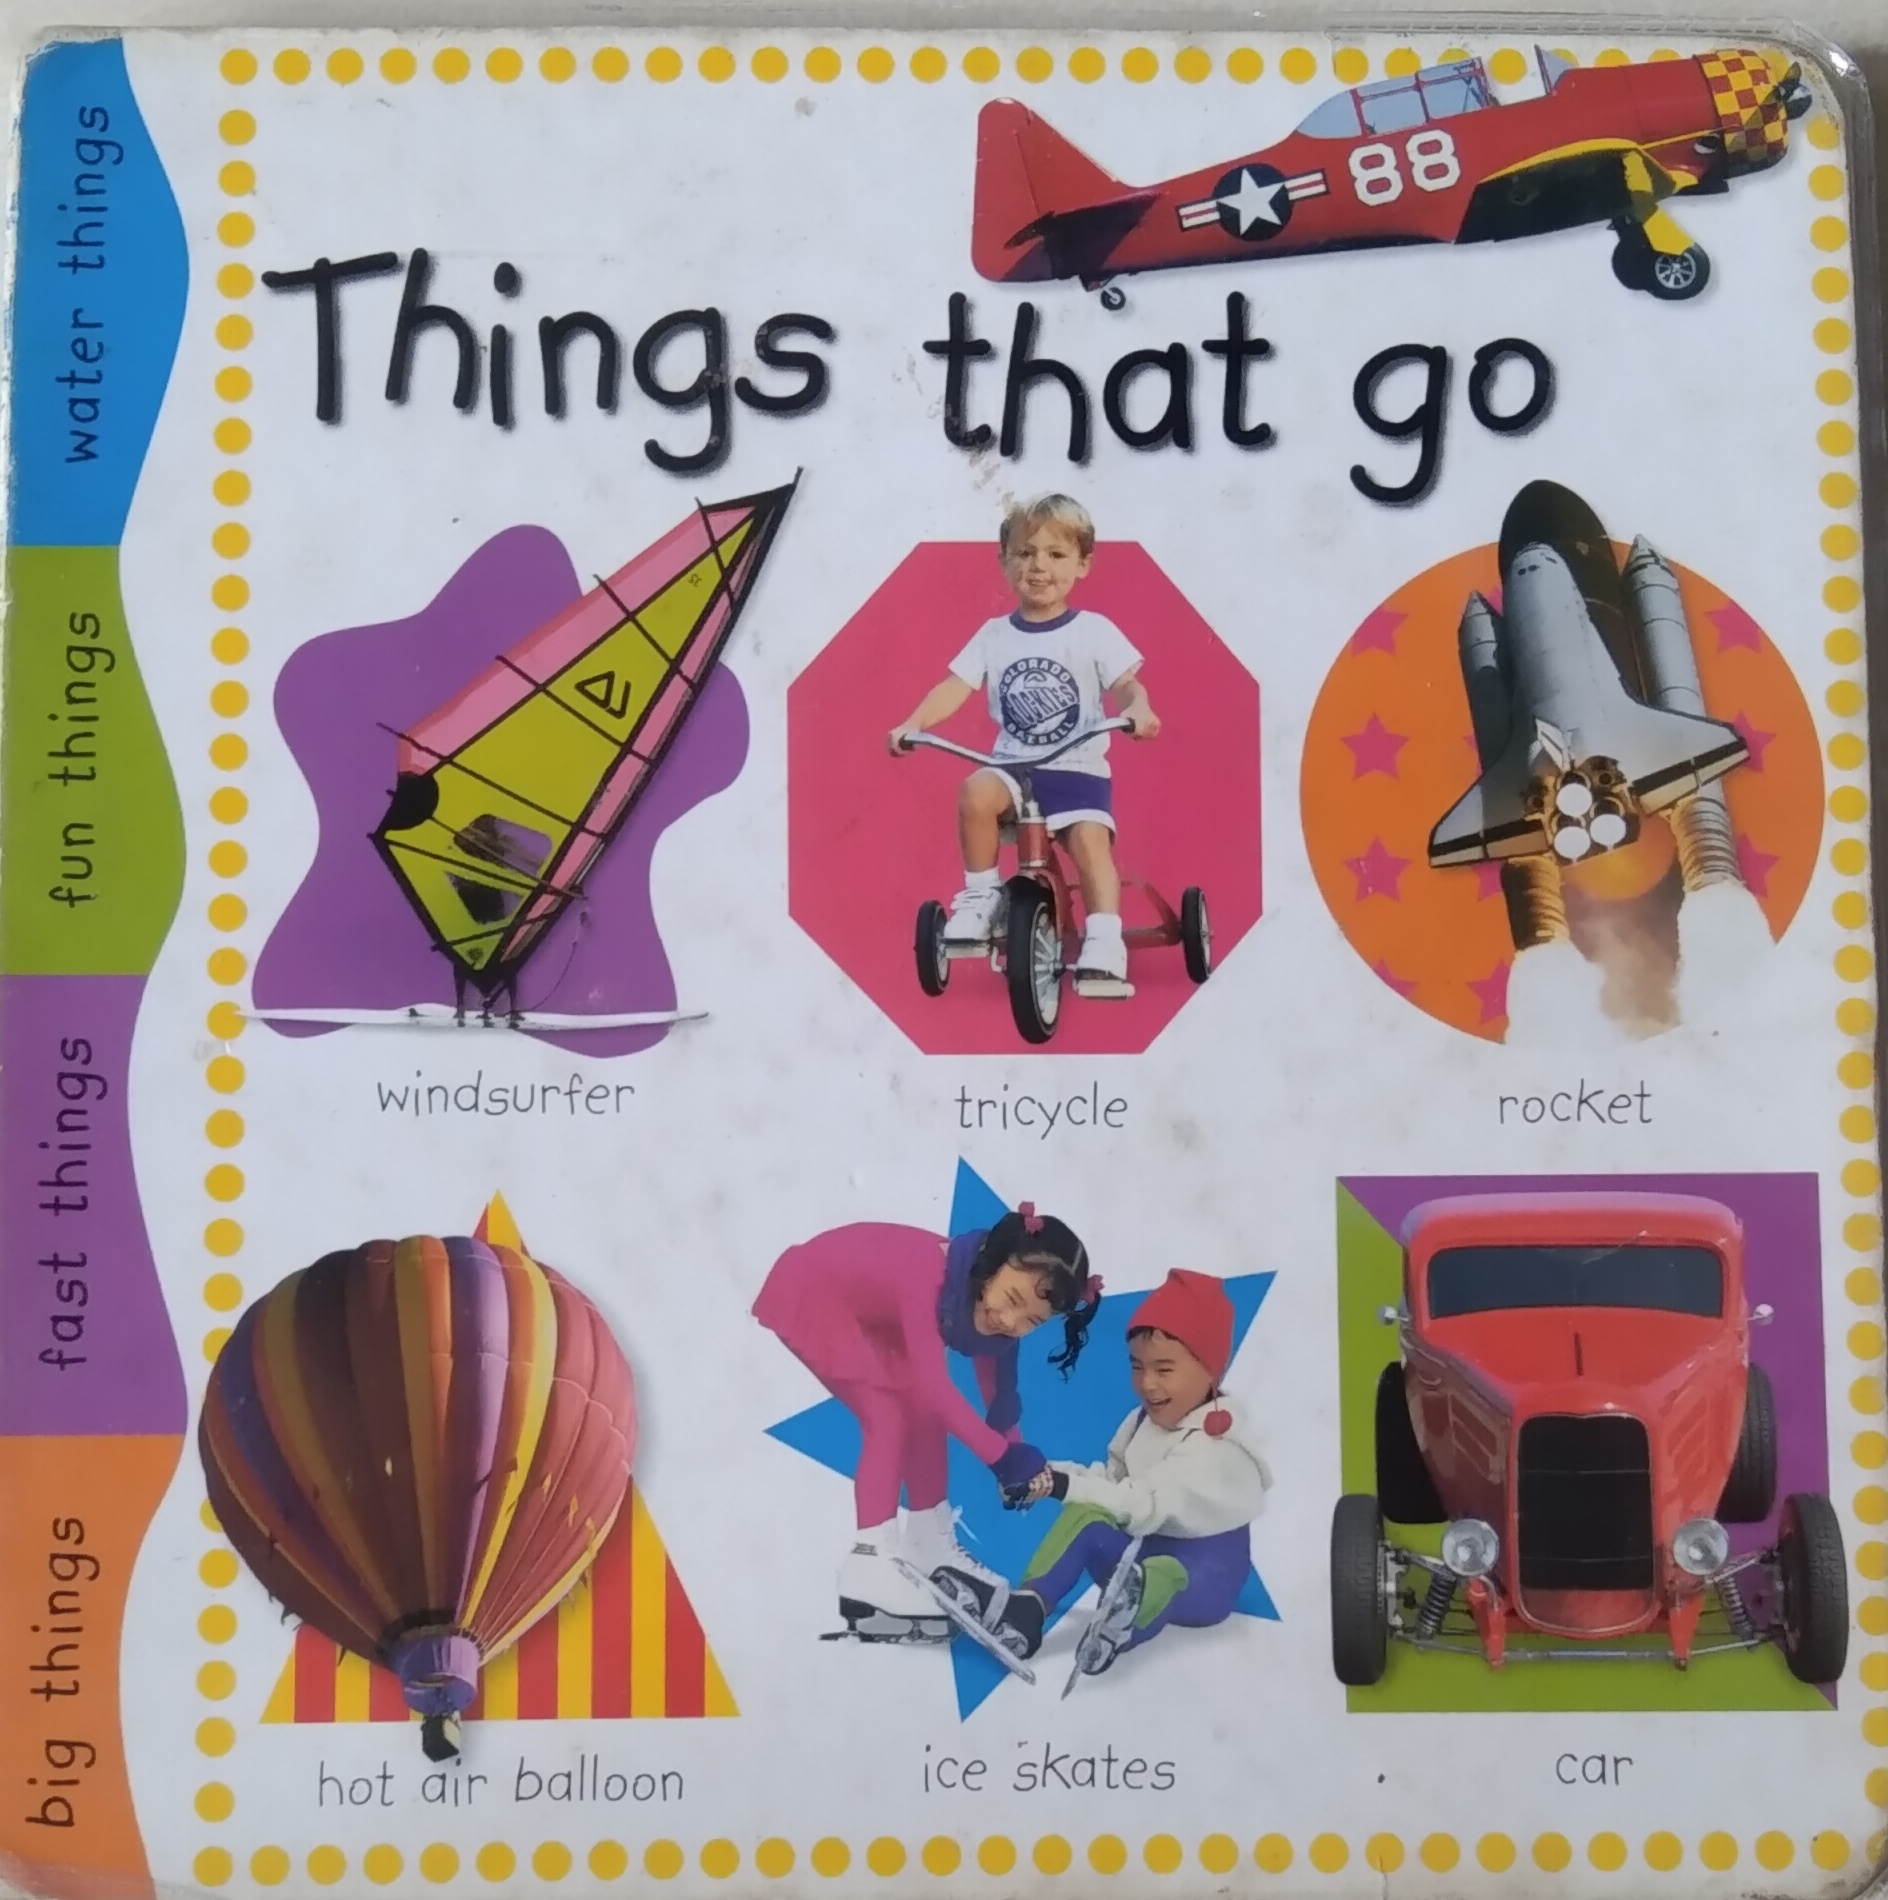 IMG : Things that go